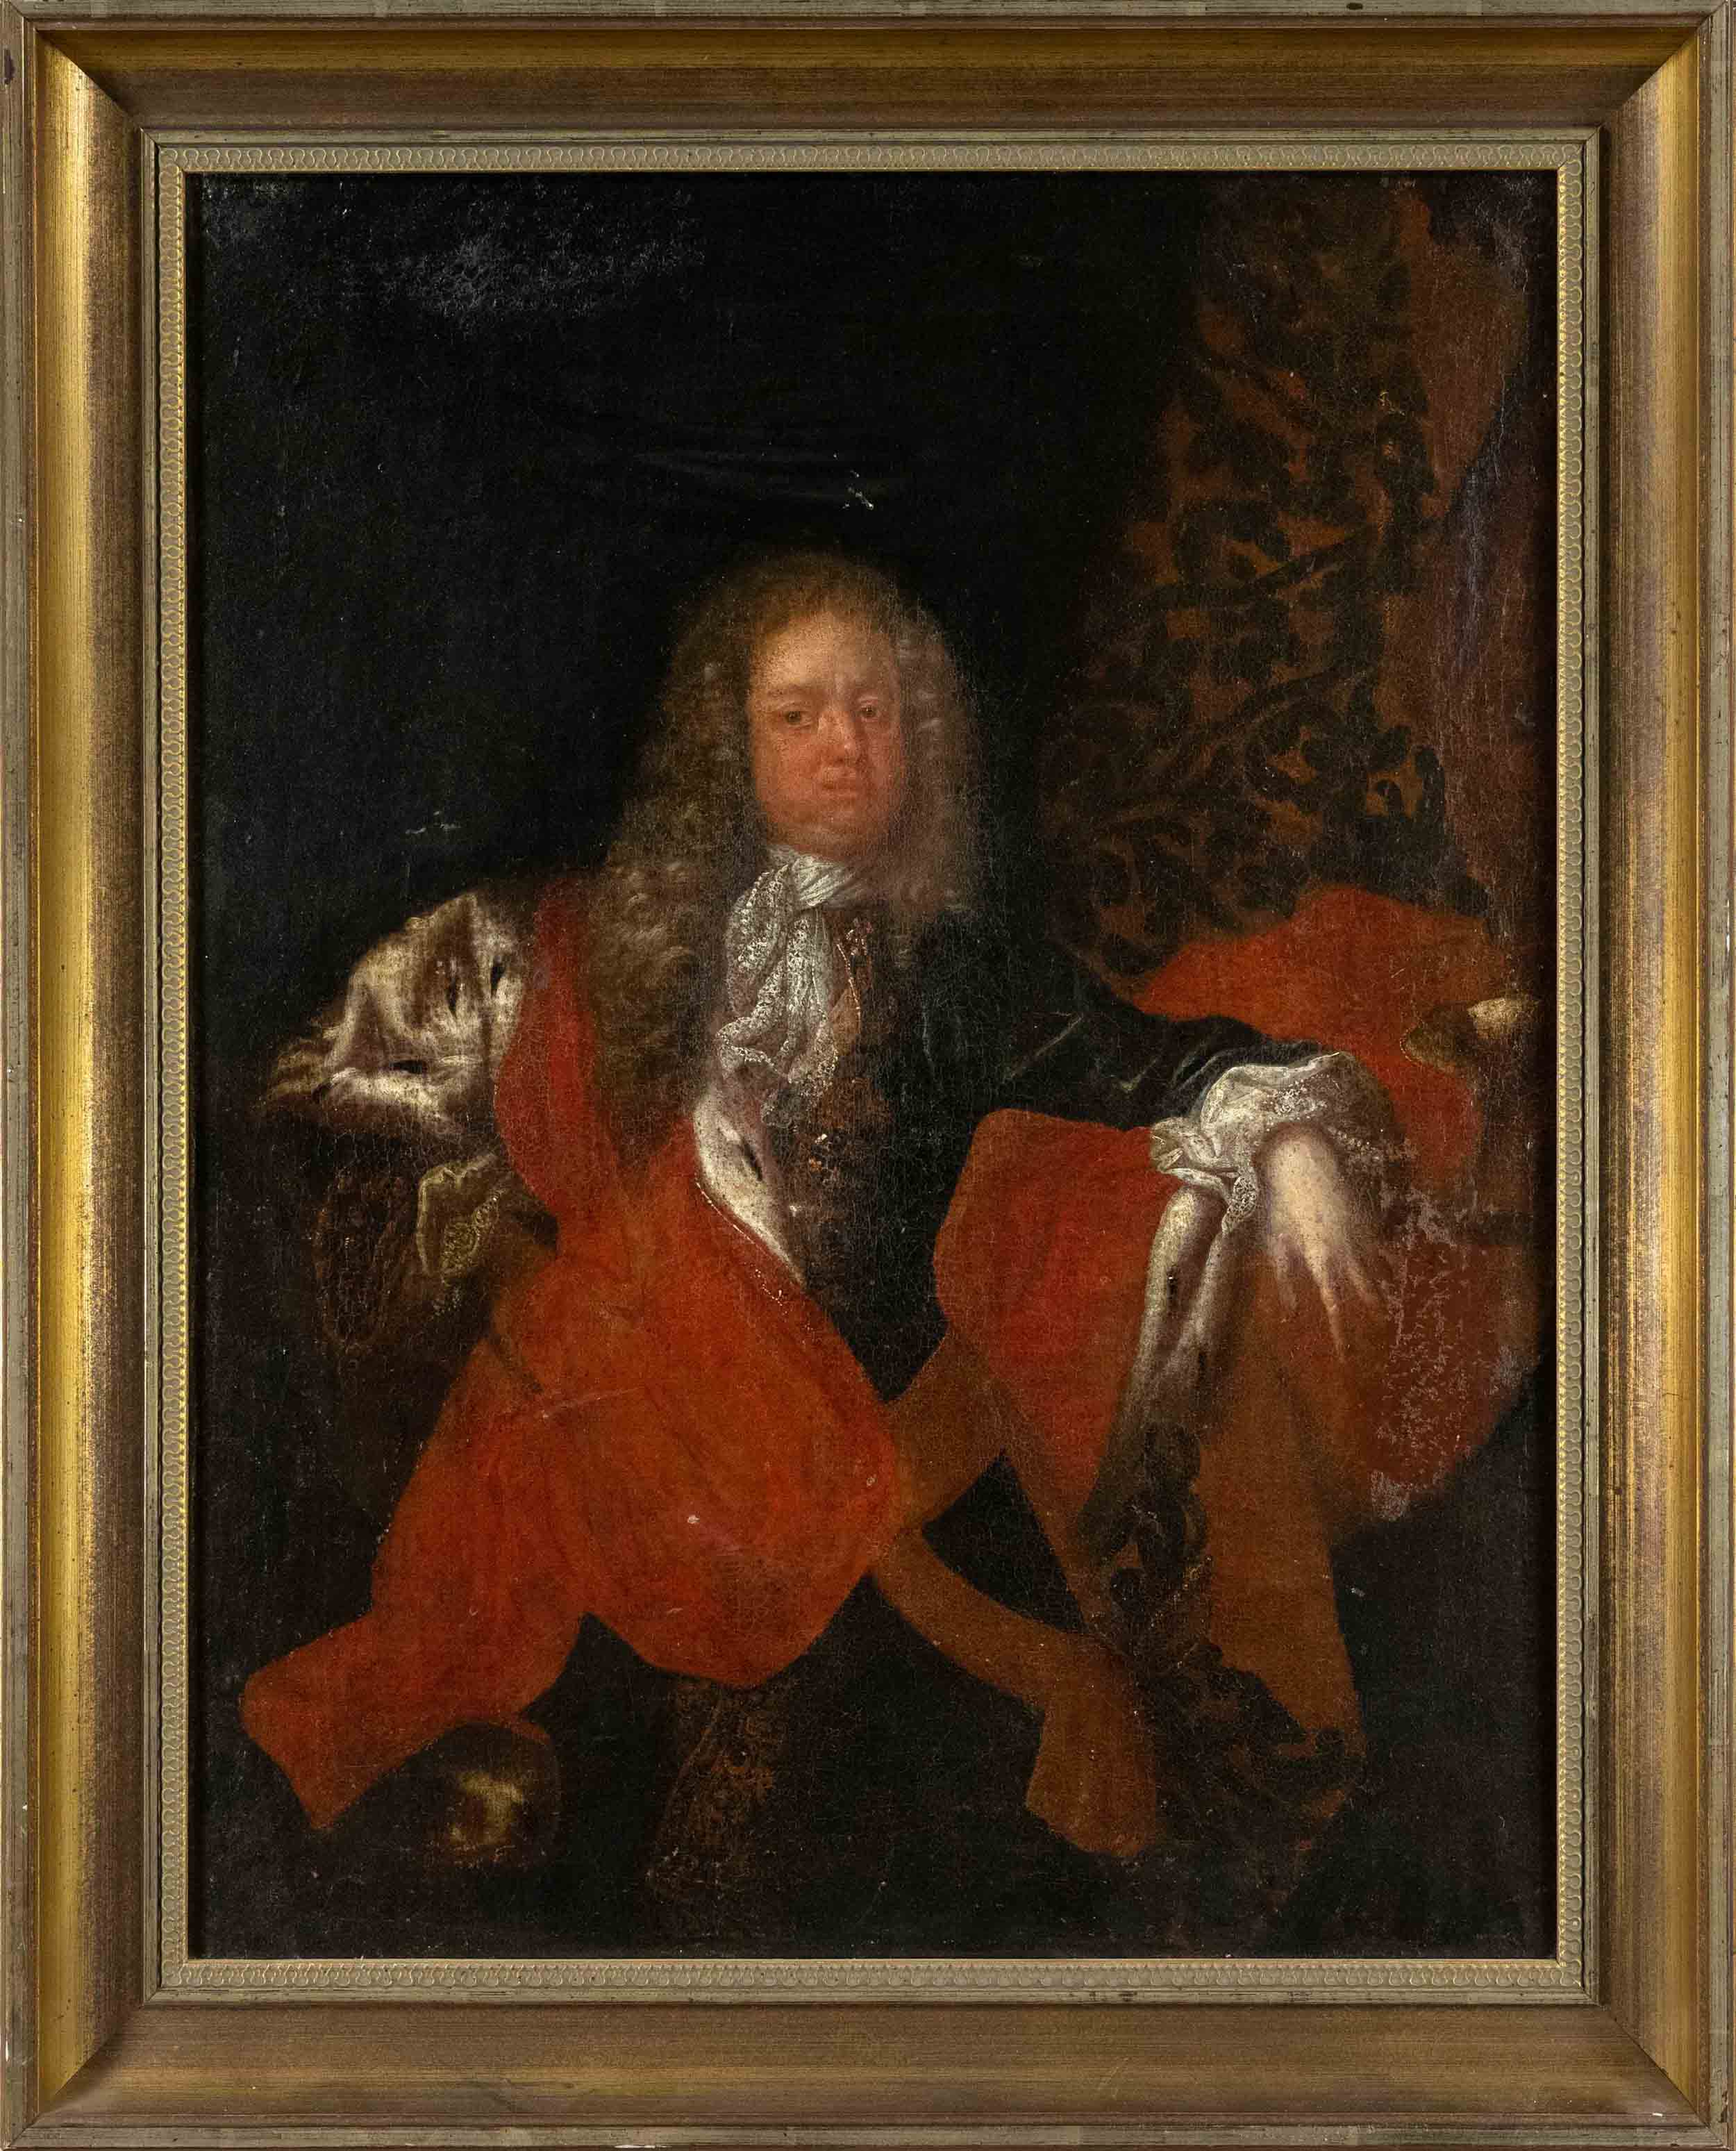 Court portrait painter of the 17th century, pair of portraits of rulers in front of brocade - Image 3 of 3